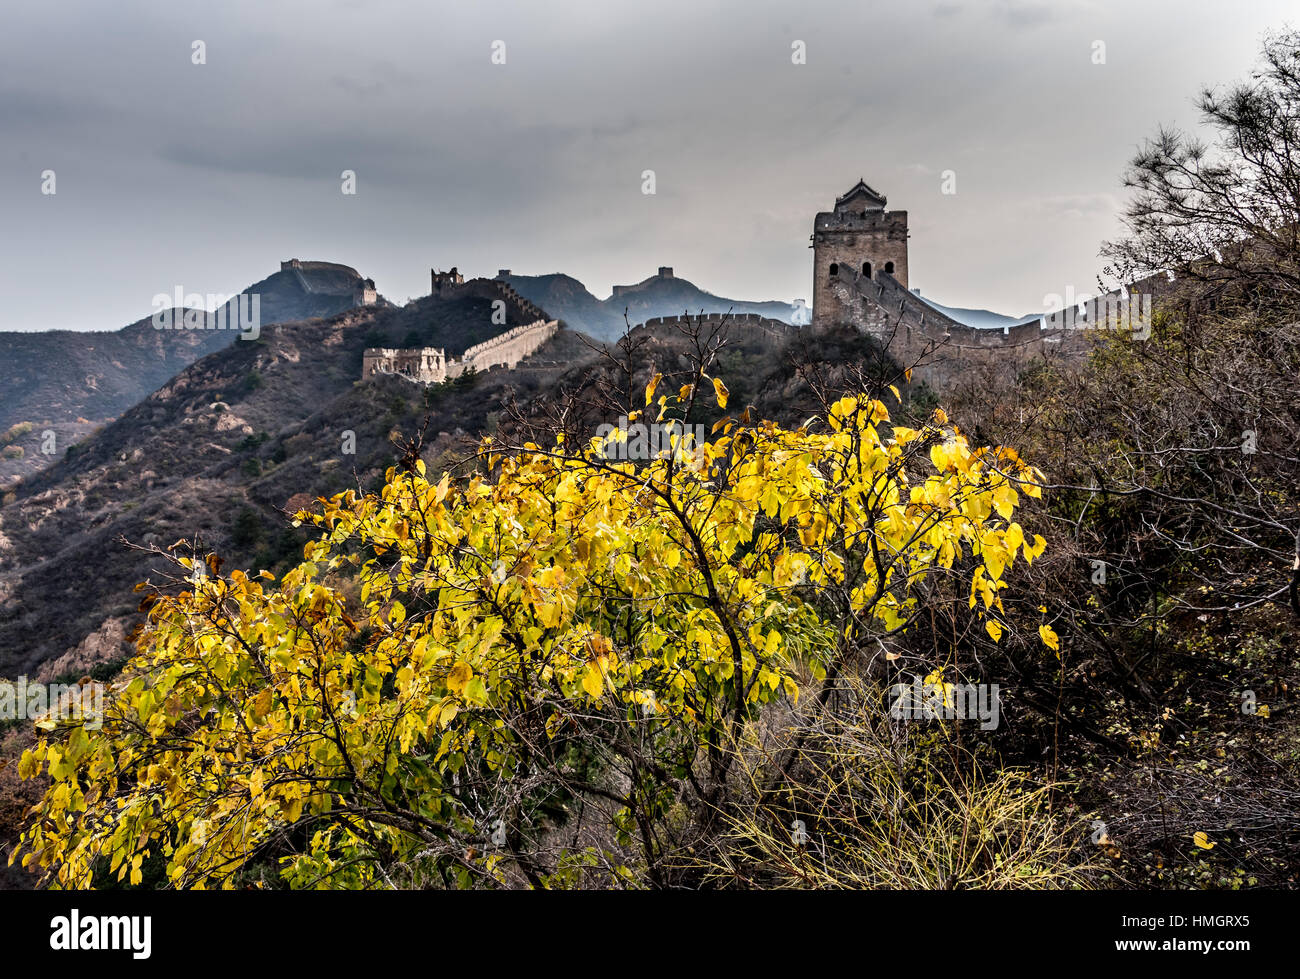 Great Wall of China in autumn, view of the Jinshanling section with yellow leaves on small trees or bushes on a misty morning. Stock Photo